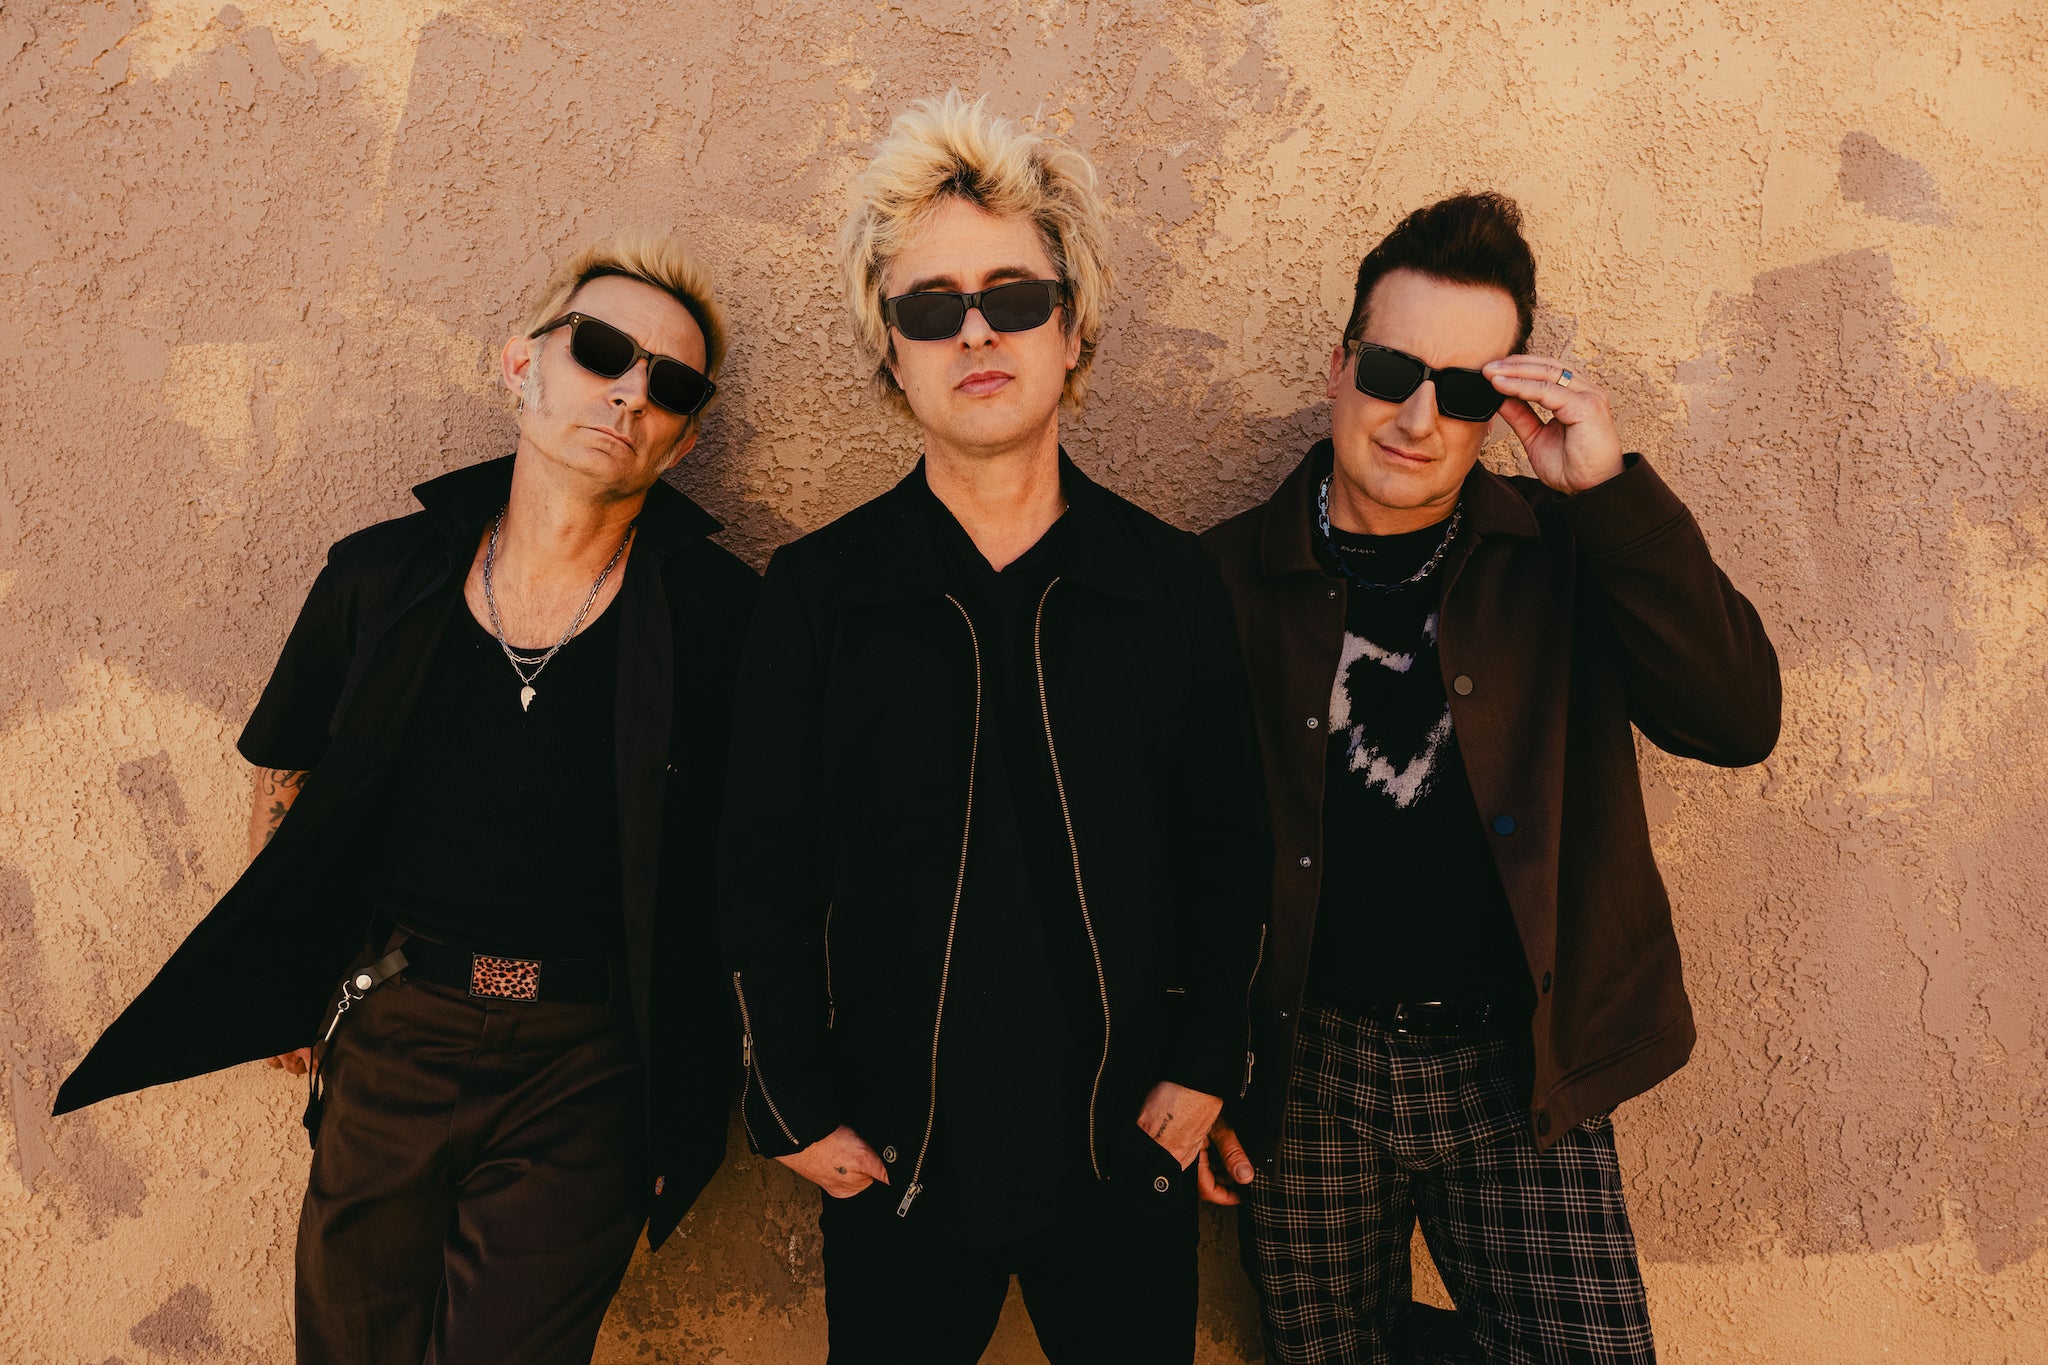 Boys to men: Green Day’s energy seems undimmed now they’re in their fifties